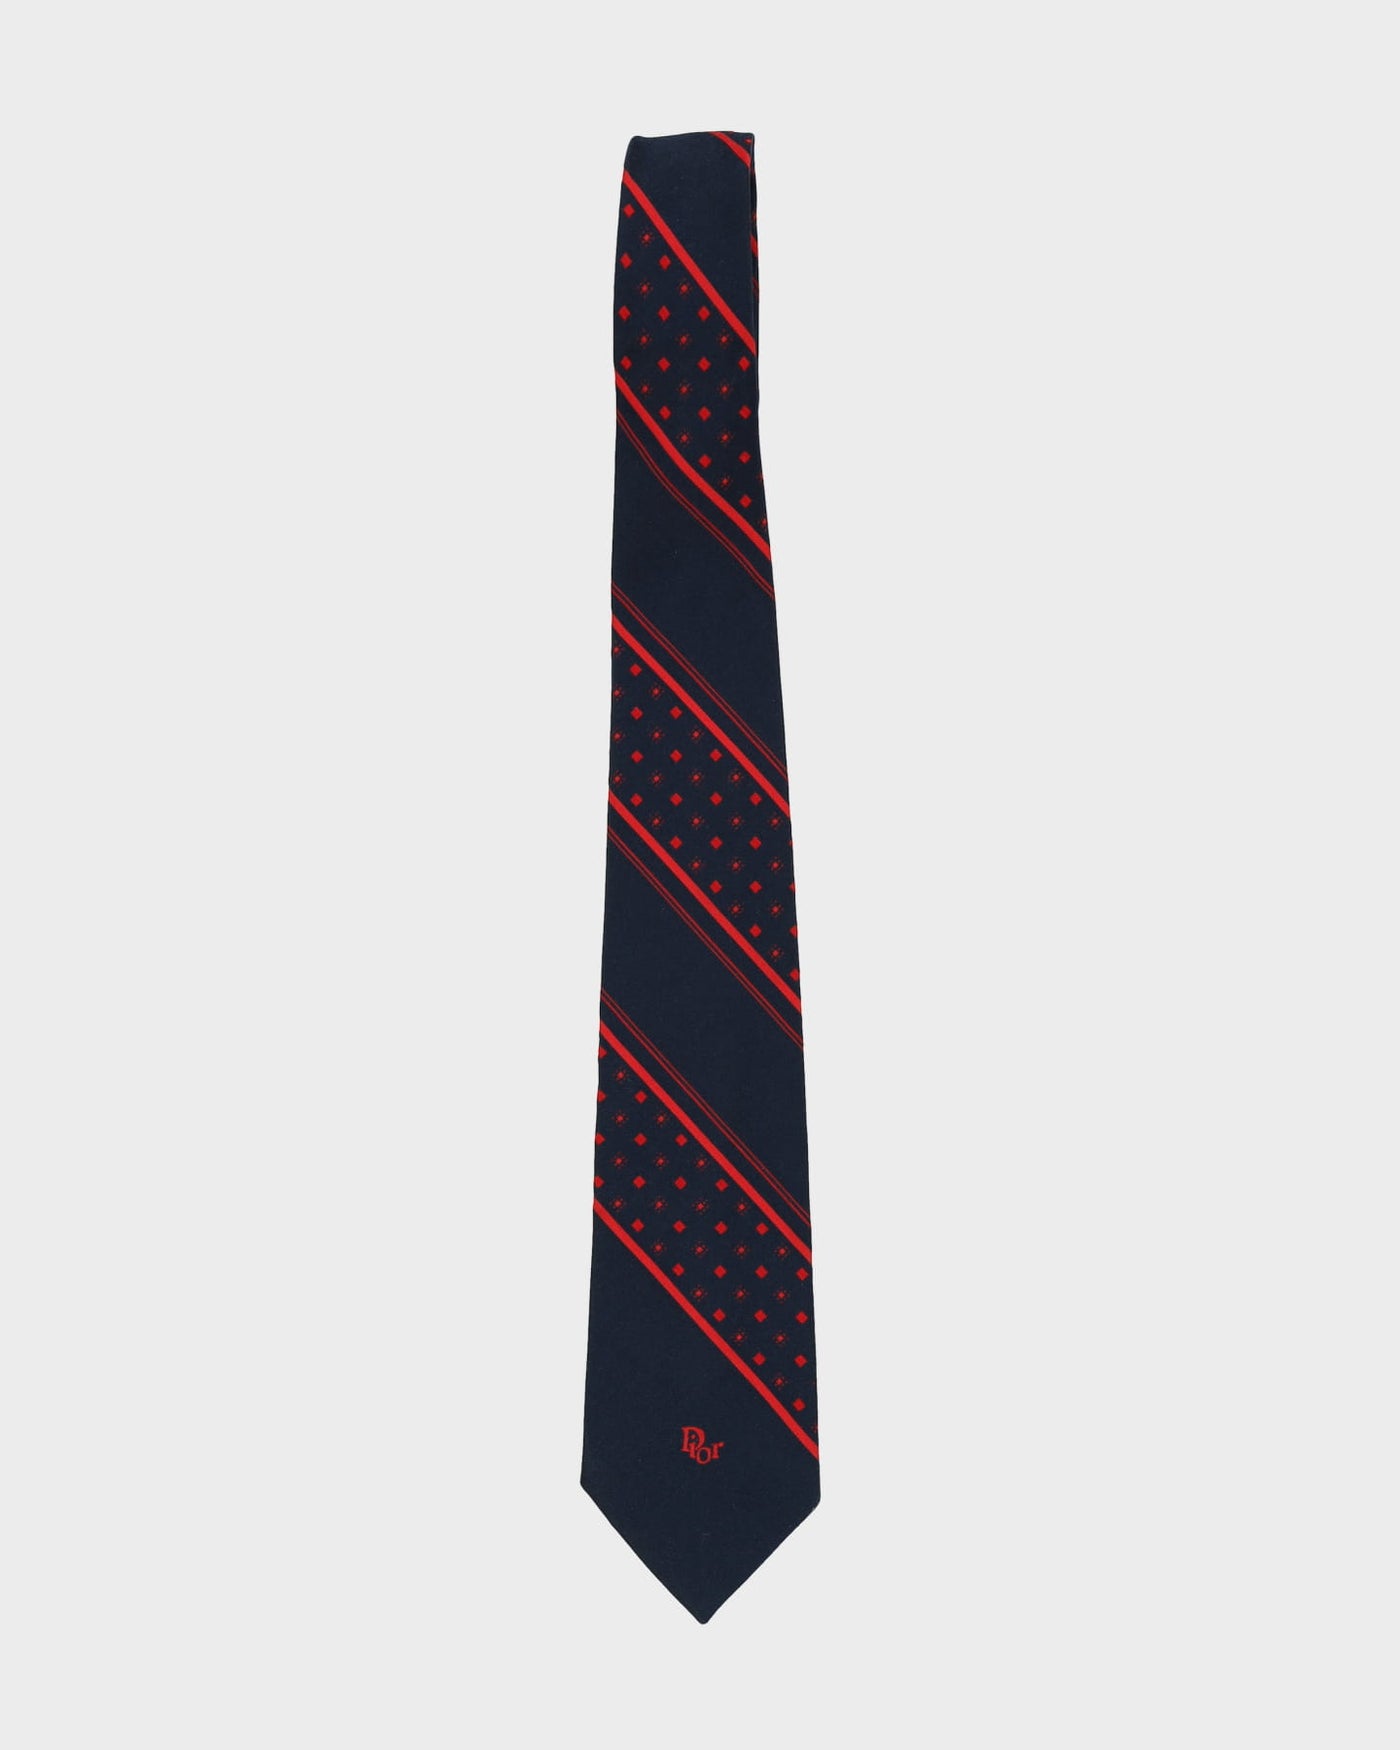 00s Christian Dior Red / Navy Patterned Tie